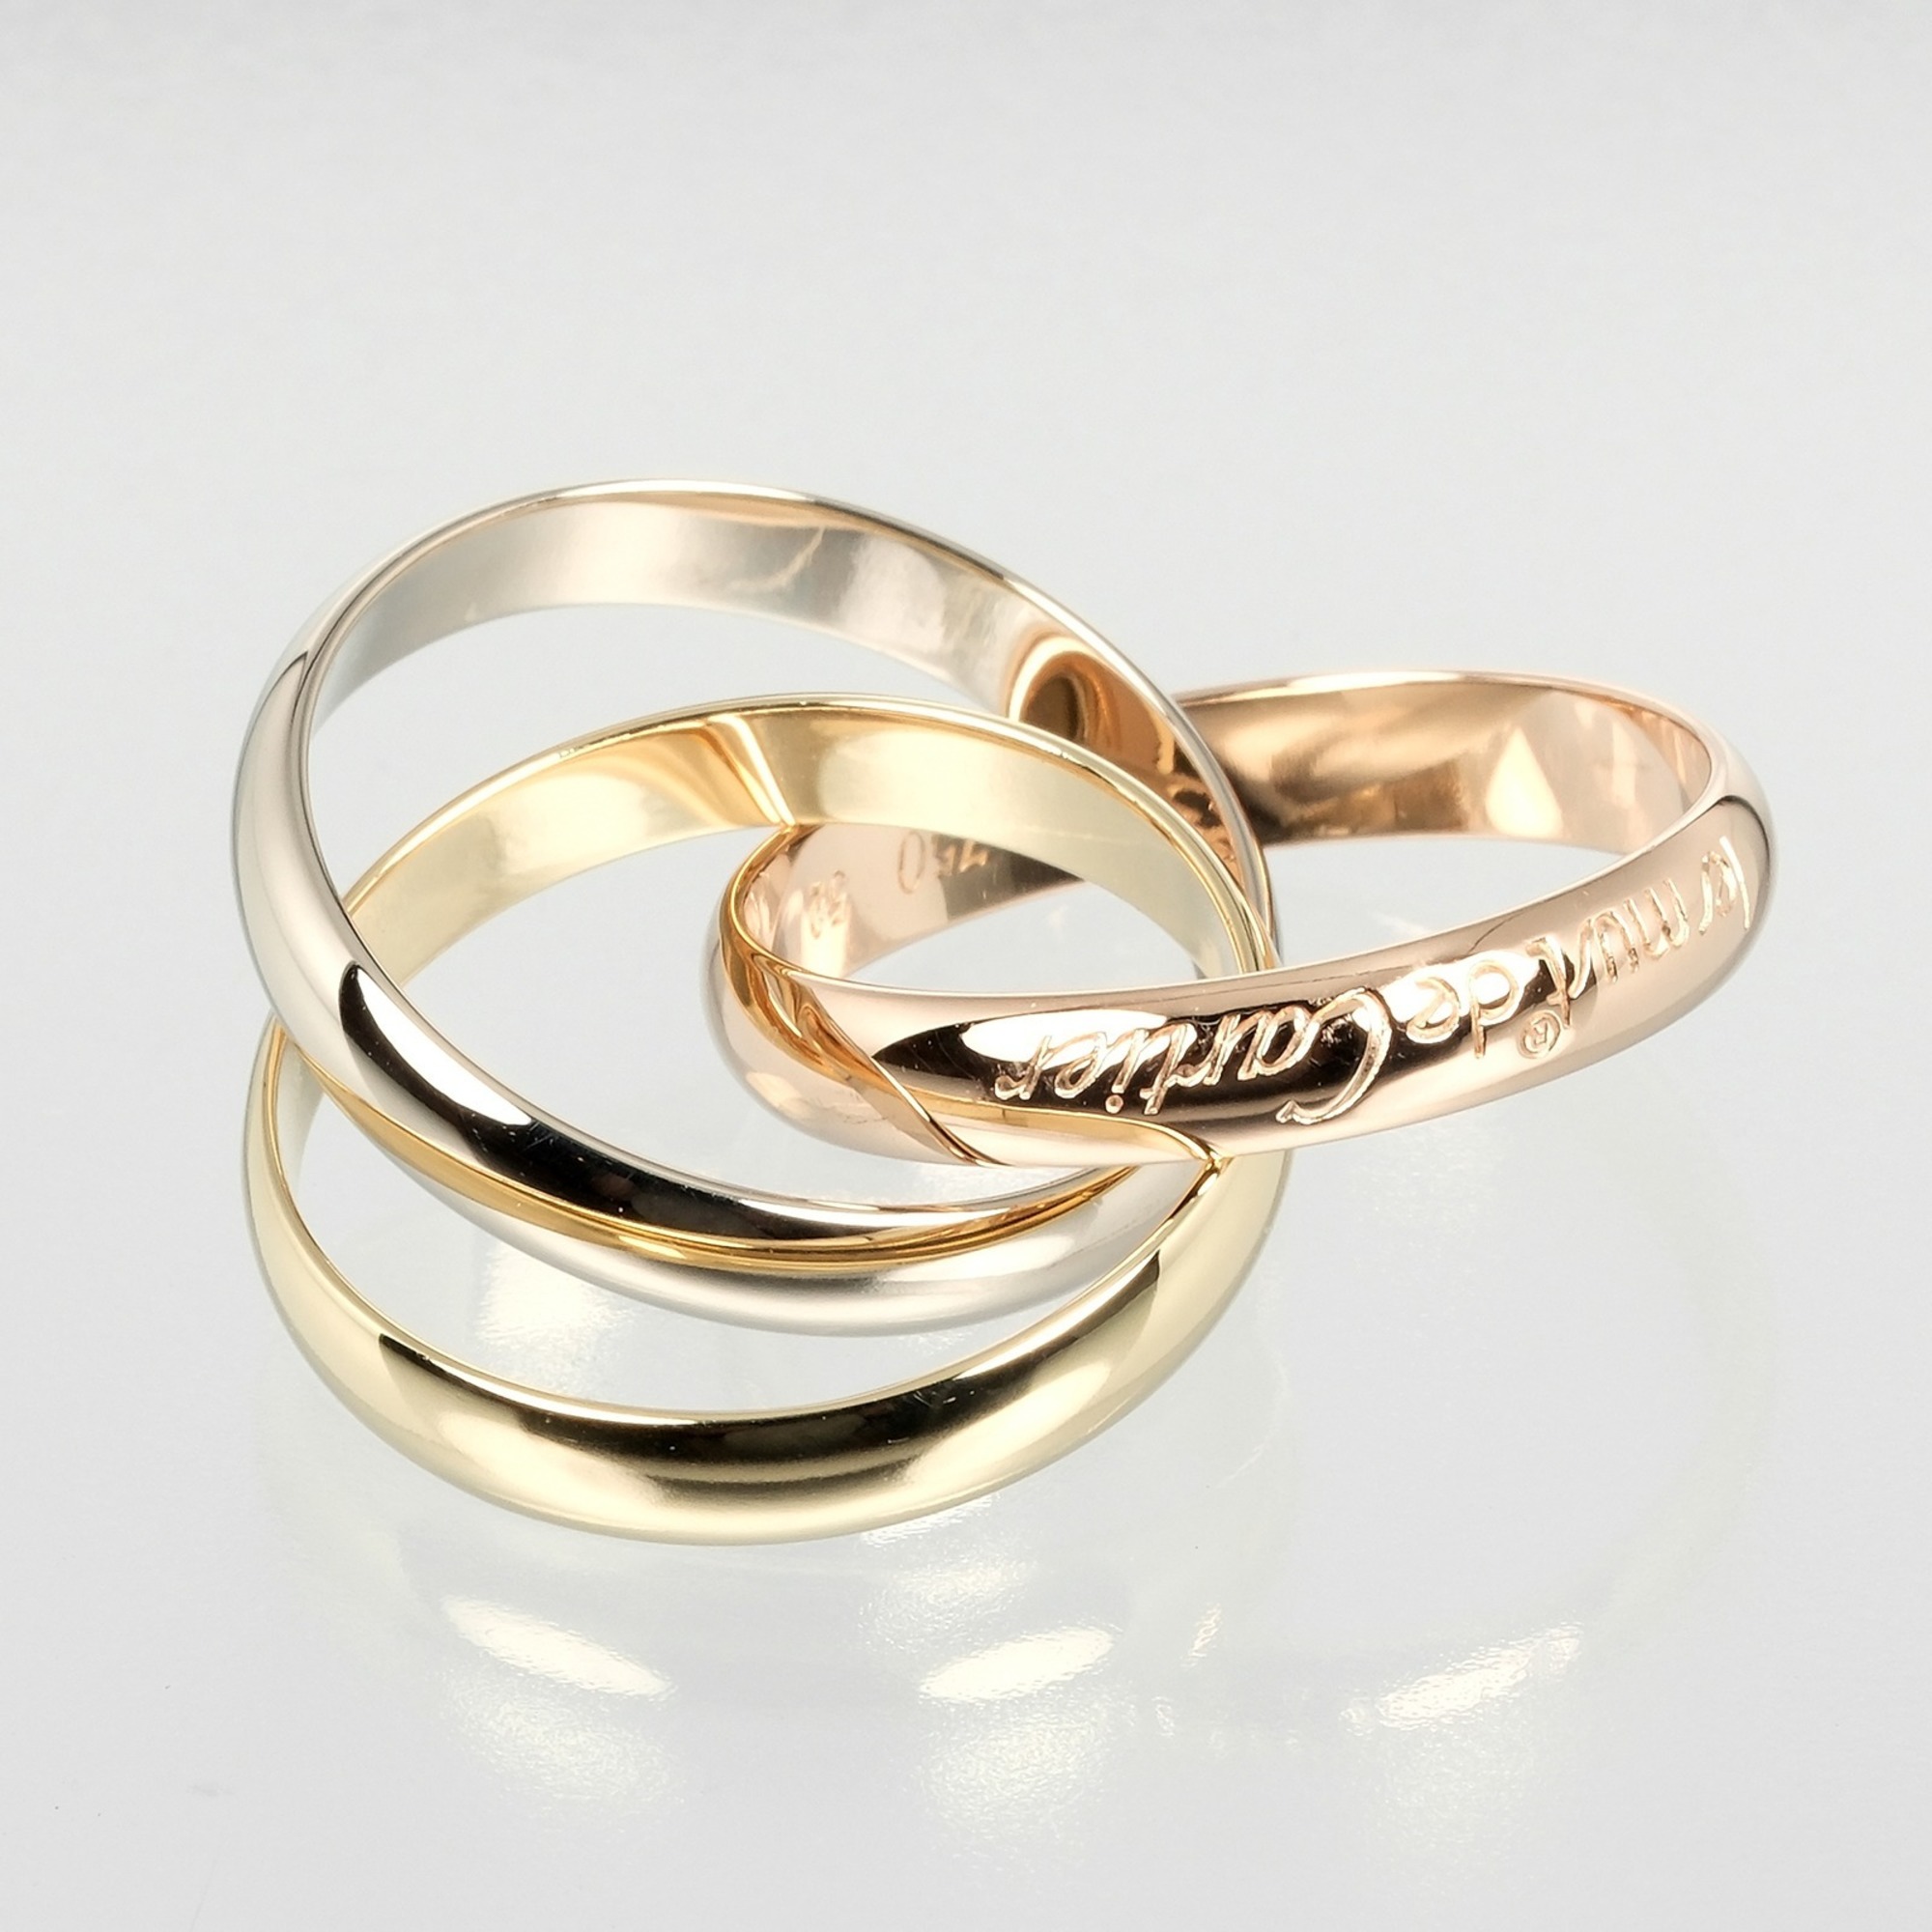 Cartier Trinity Ring, size 11.5, K18 gold, YG, PG, WG, approx. 7.75g